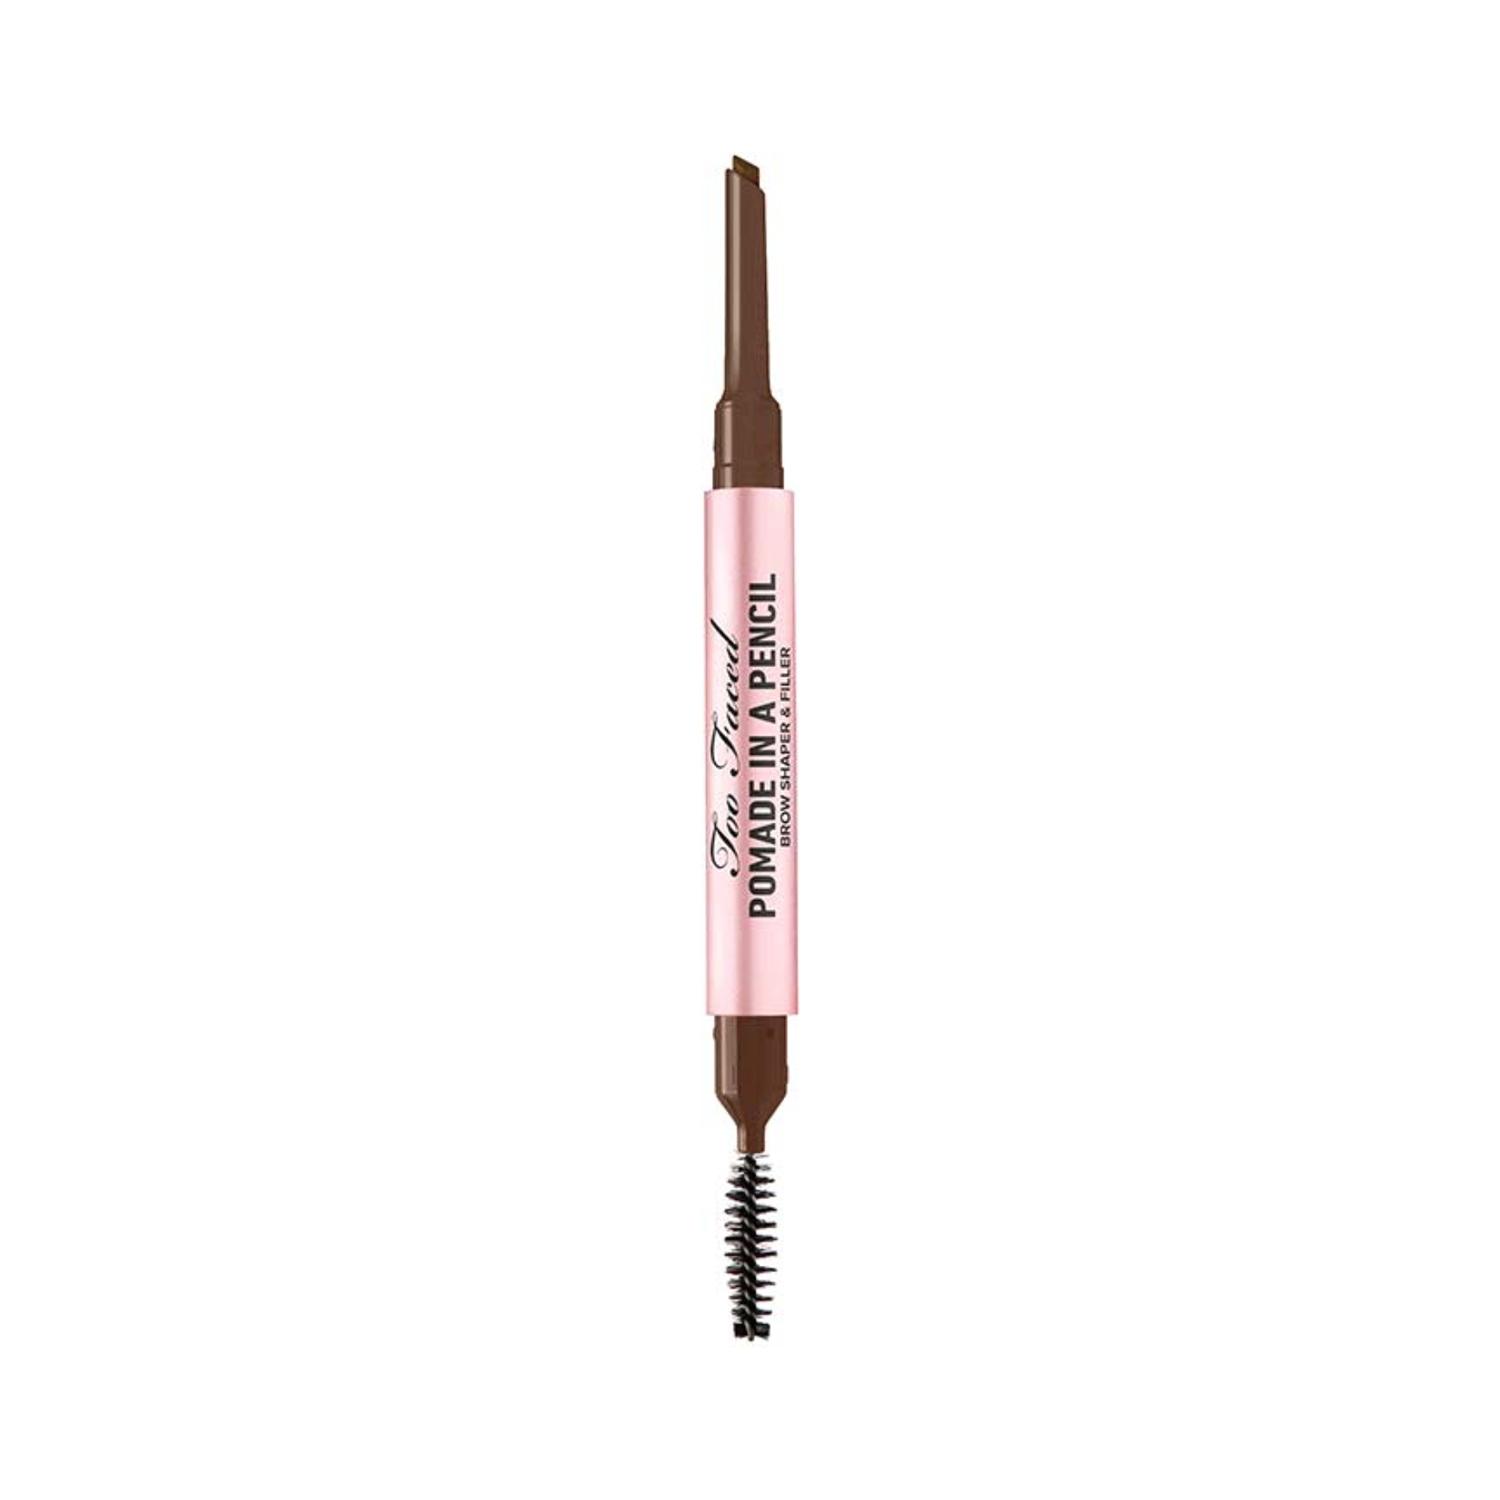 Too Faced Pomade In A Pencil - Espresso (0.19g)